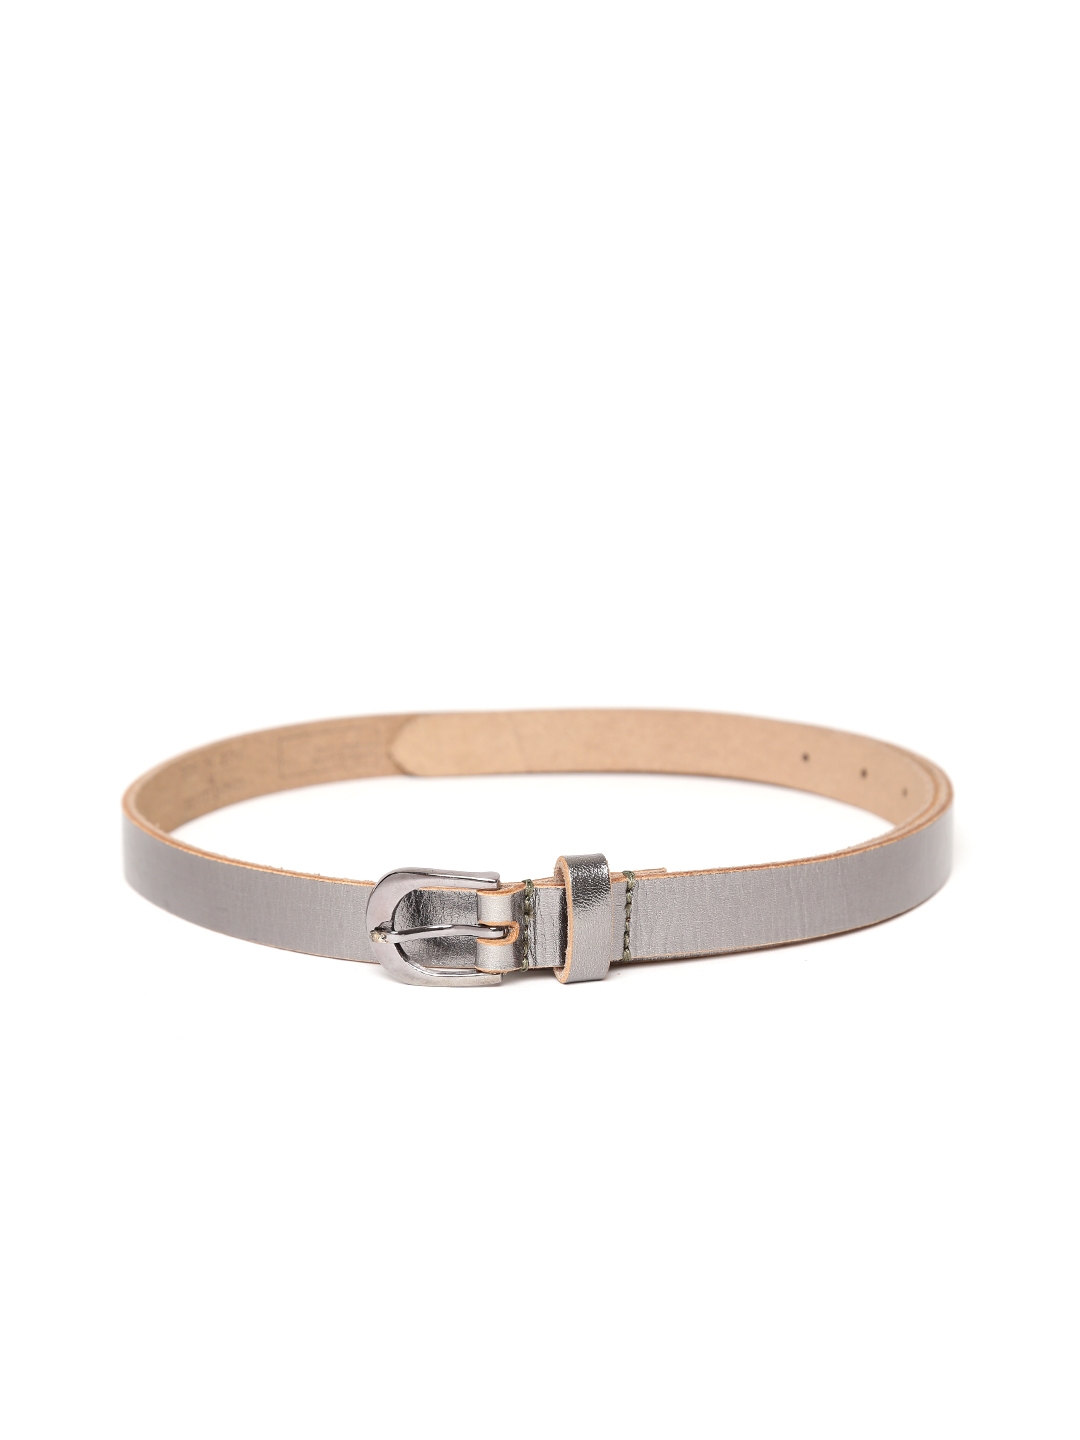 Buy United Colors Of Benetton Women Silver Toned Leather Solid Belt ...